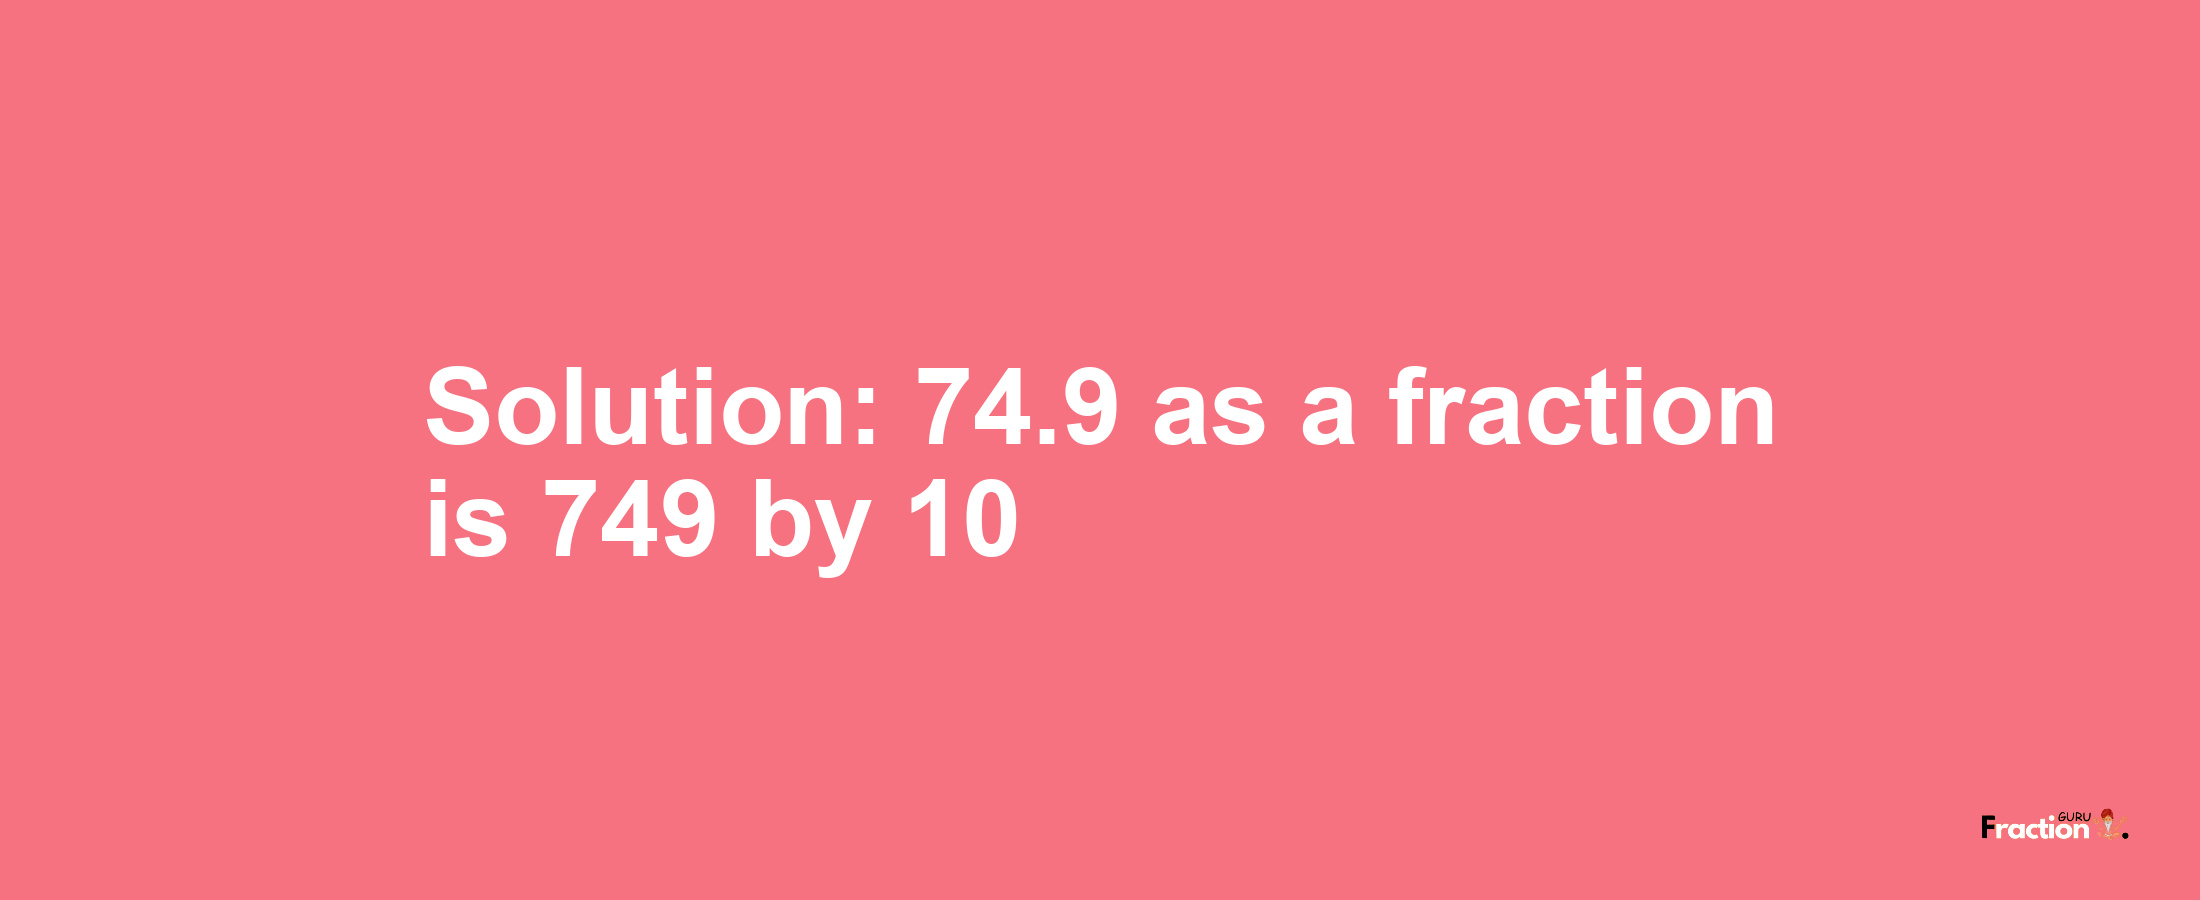 Solution:74.9 as a fraction is 749/10